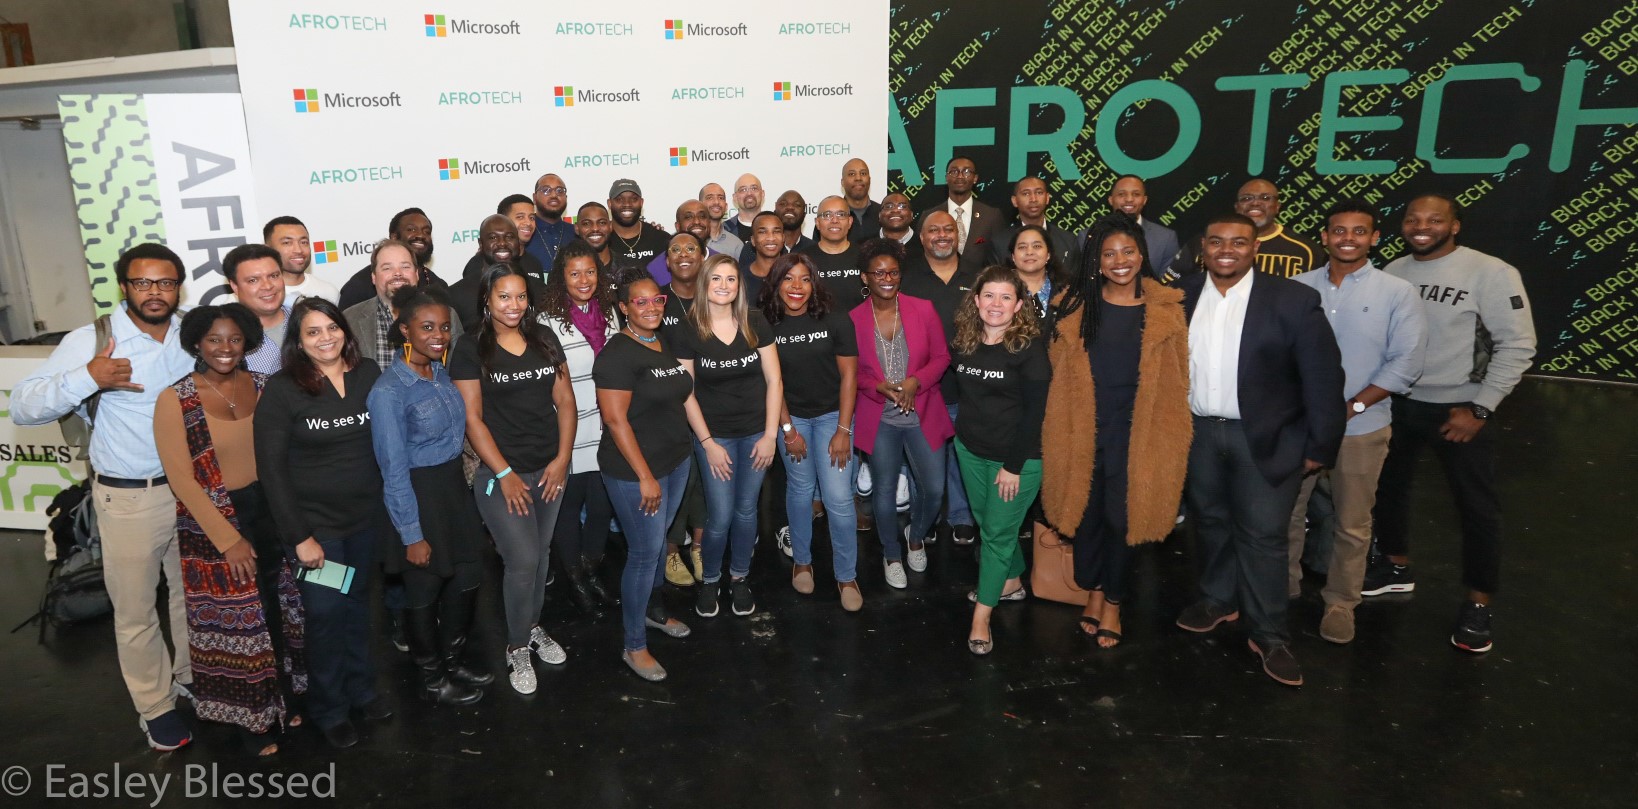 About 45 Microsoft employees pose in front of the Microsoft booth at the AfroTech conference in San Francisco